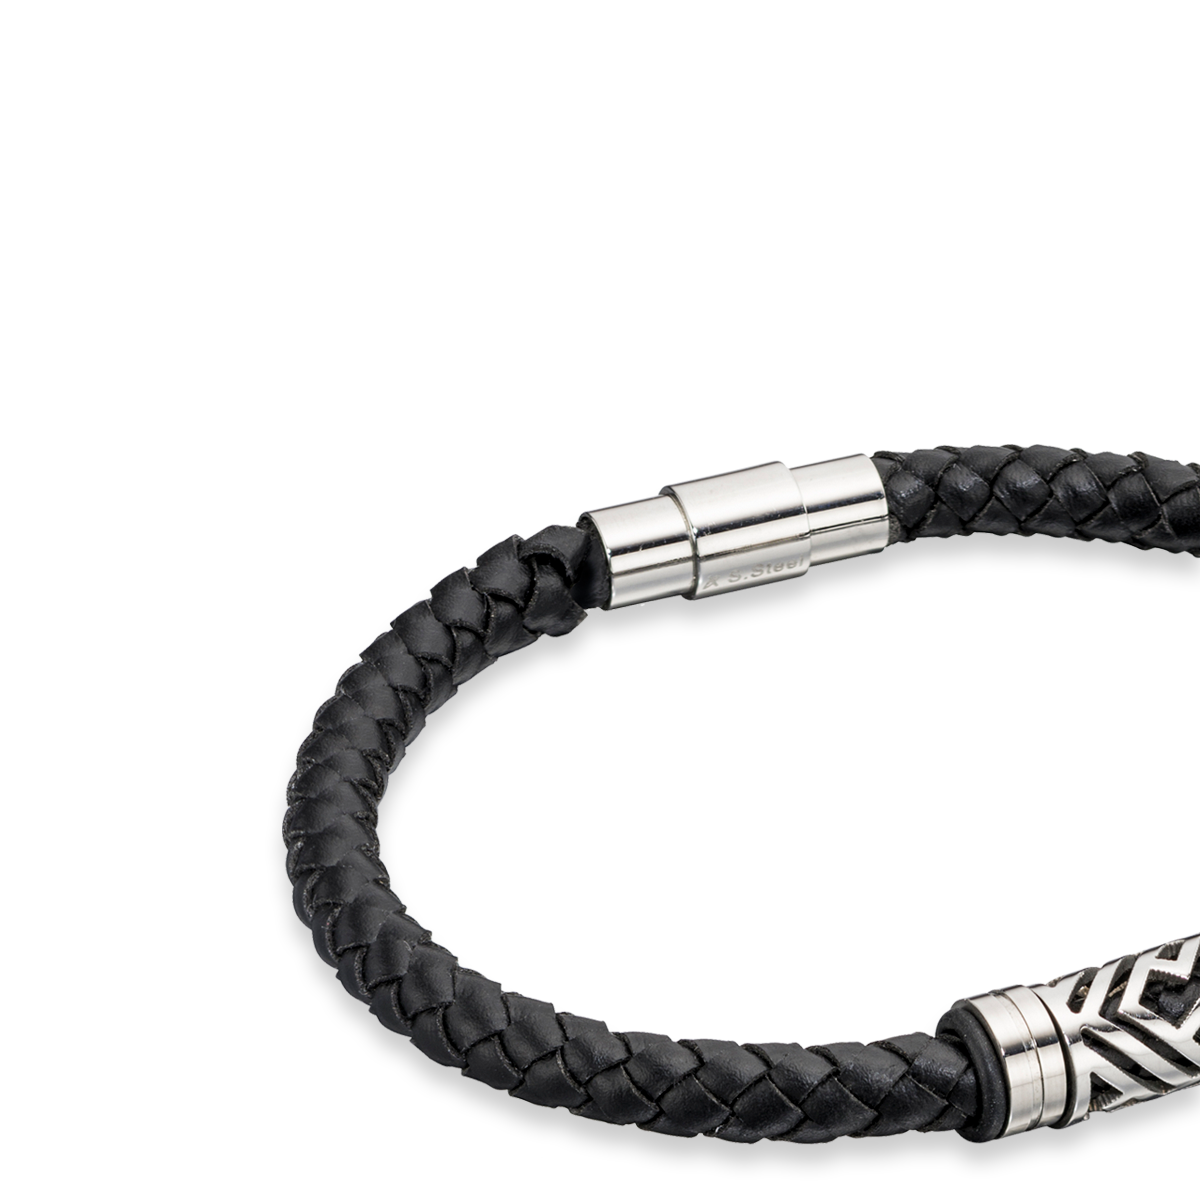 Fred Bennett Black Recycled Leather Bracelet With Cord Detail